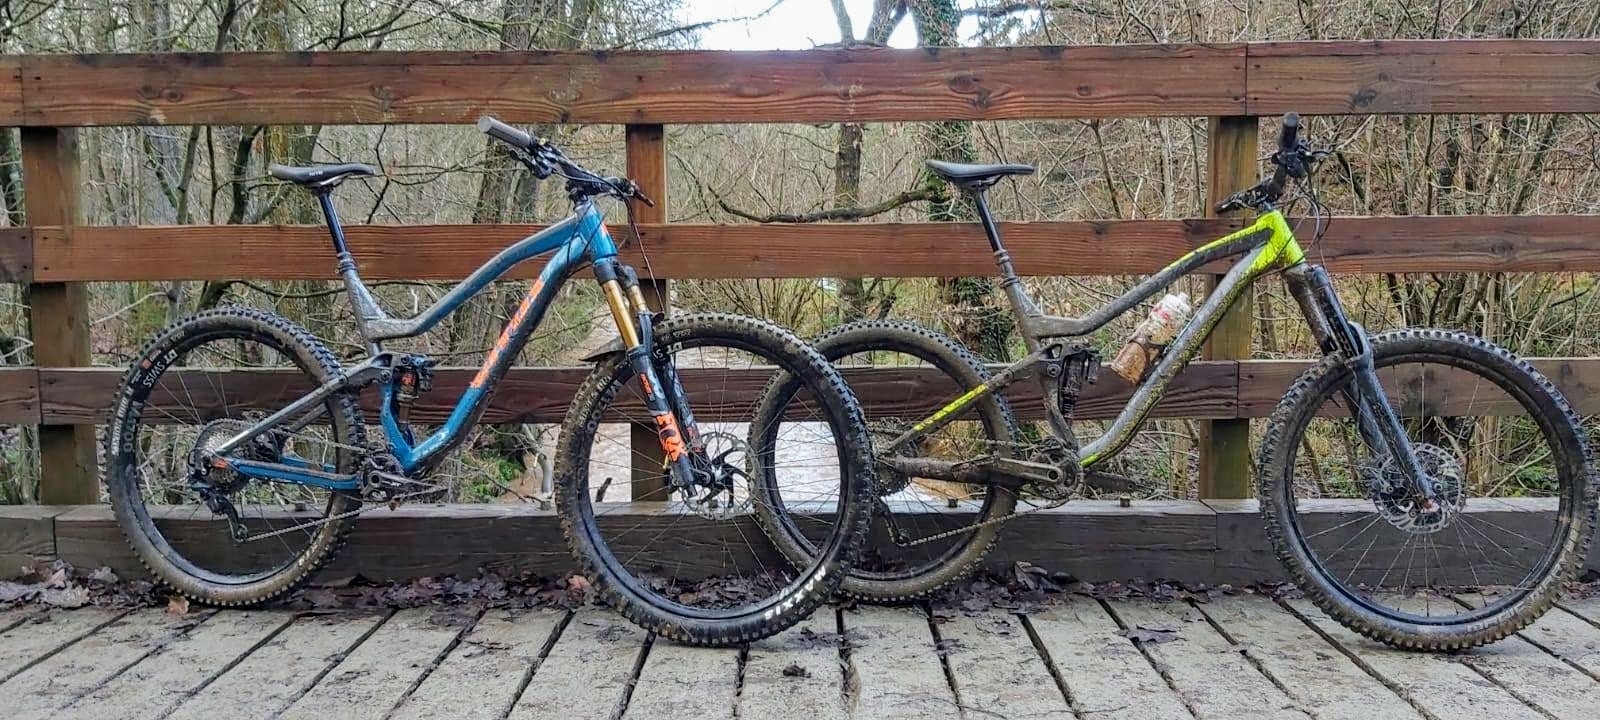 Mudtastic ride in the Wyre Forest